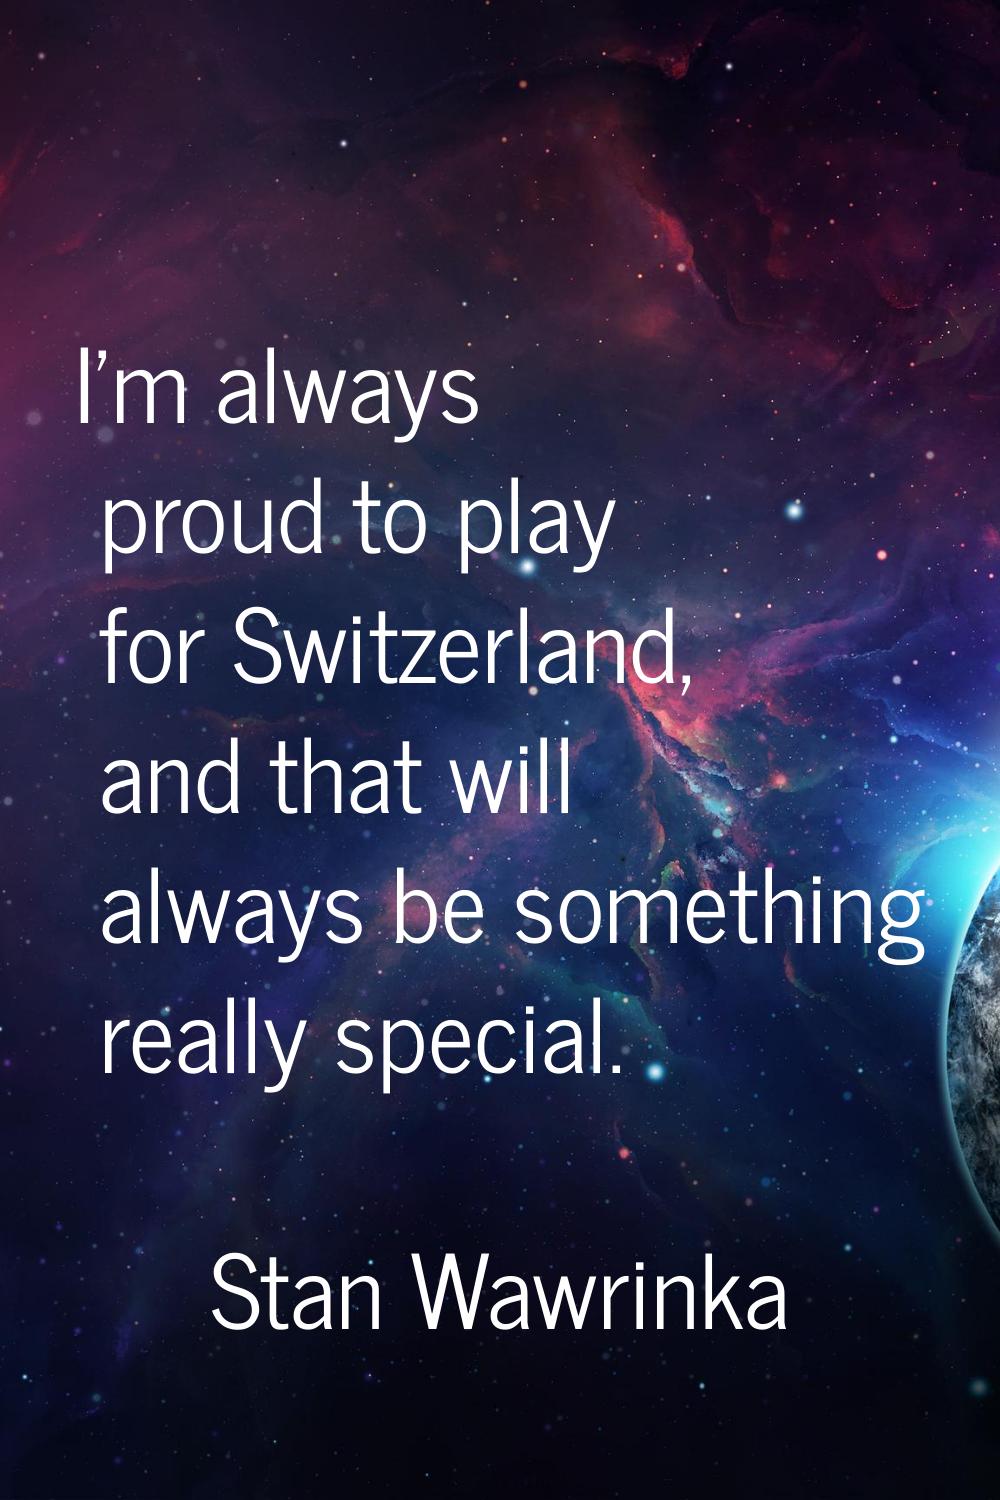 I'm always proud to play for Switzerland, and that will always be something really special.